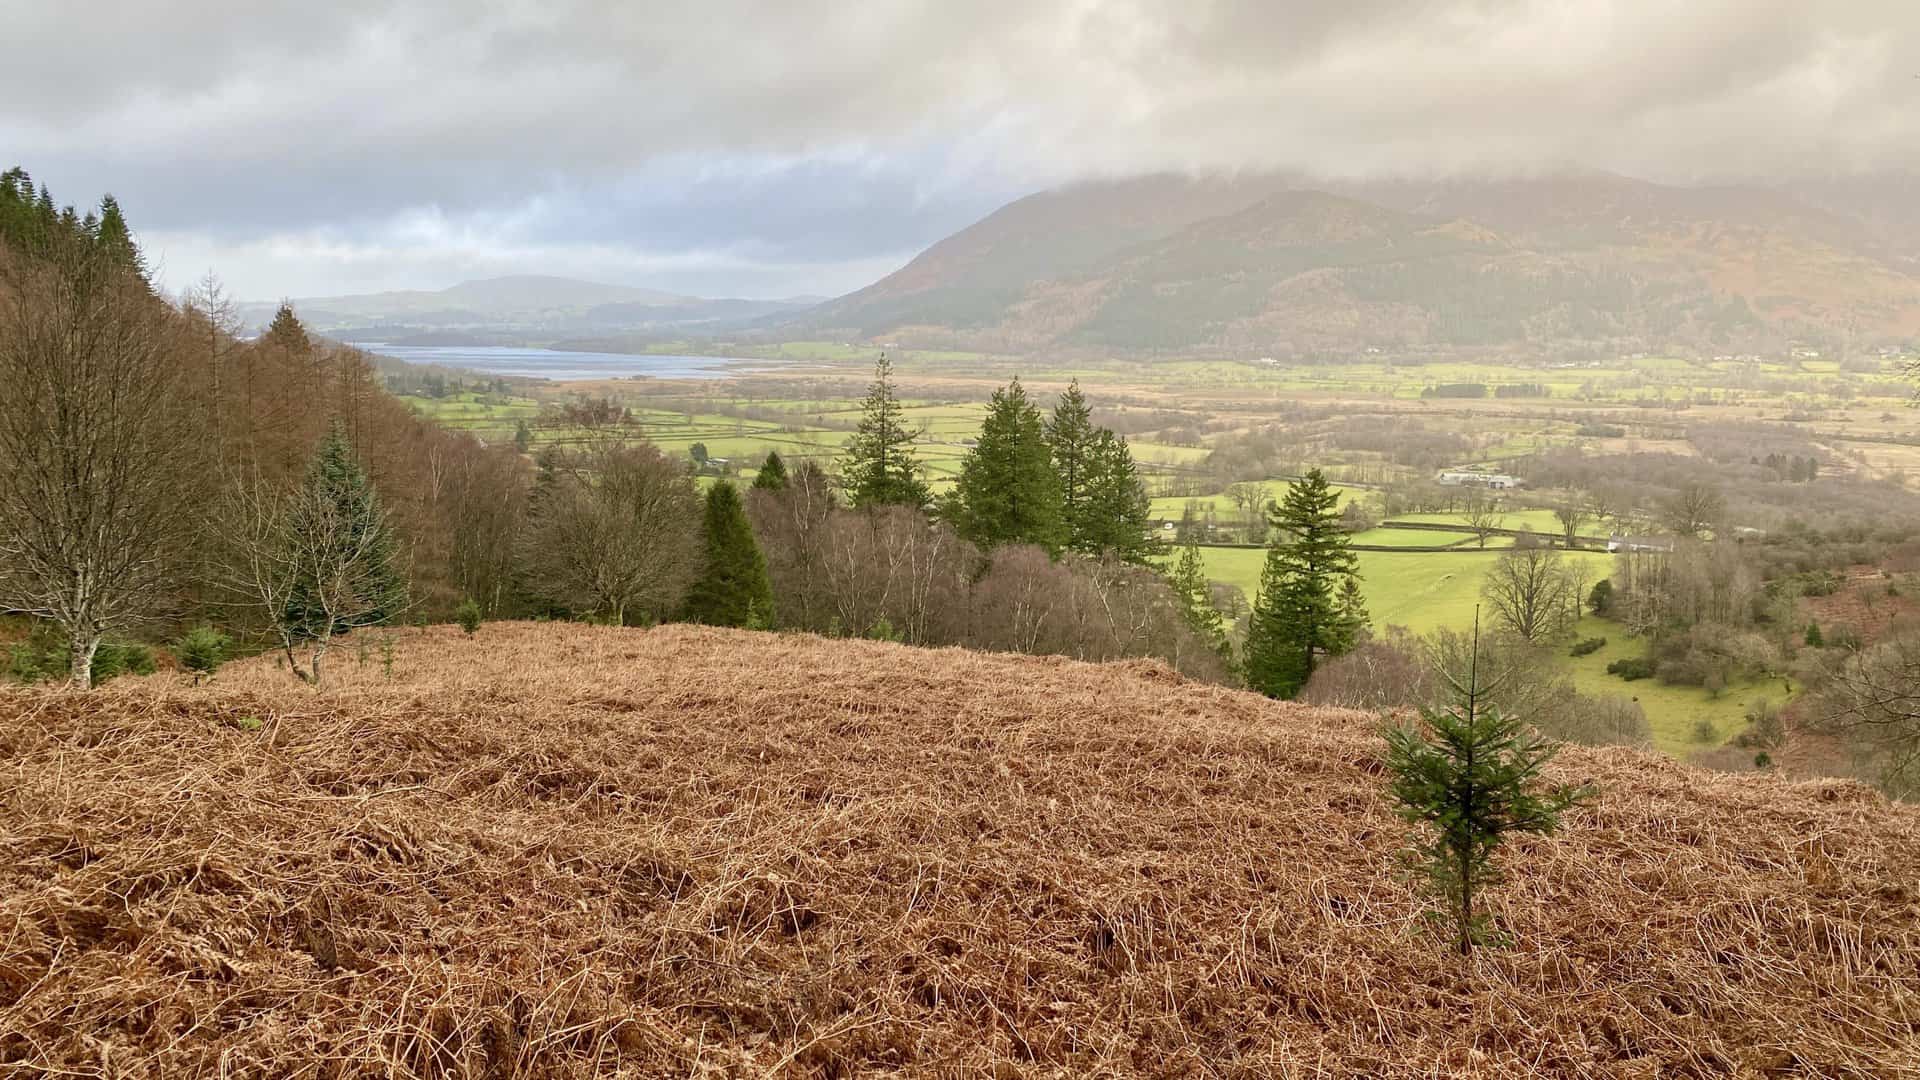 The view north towards Bassenthwaite Lake shortly after leaving the car park.